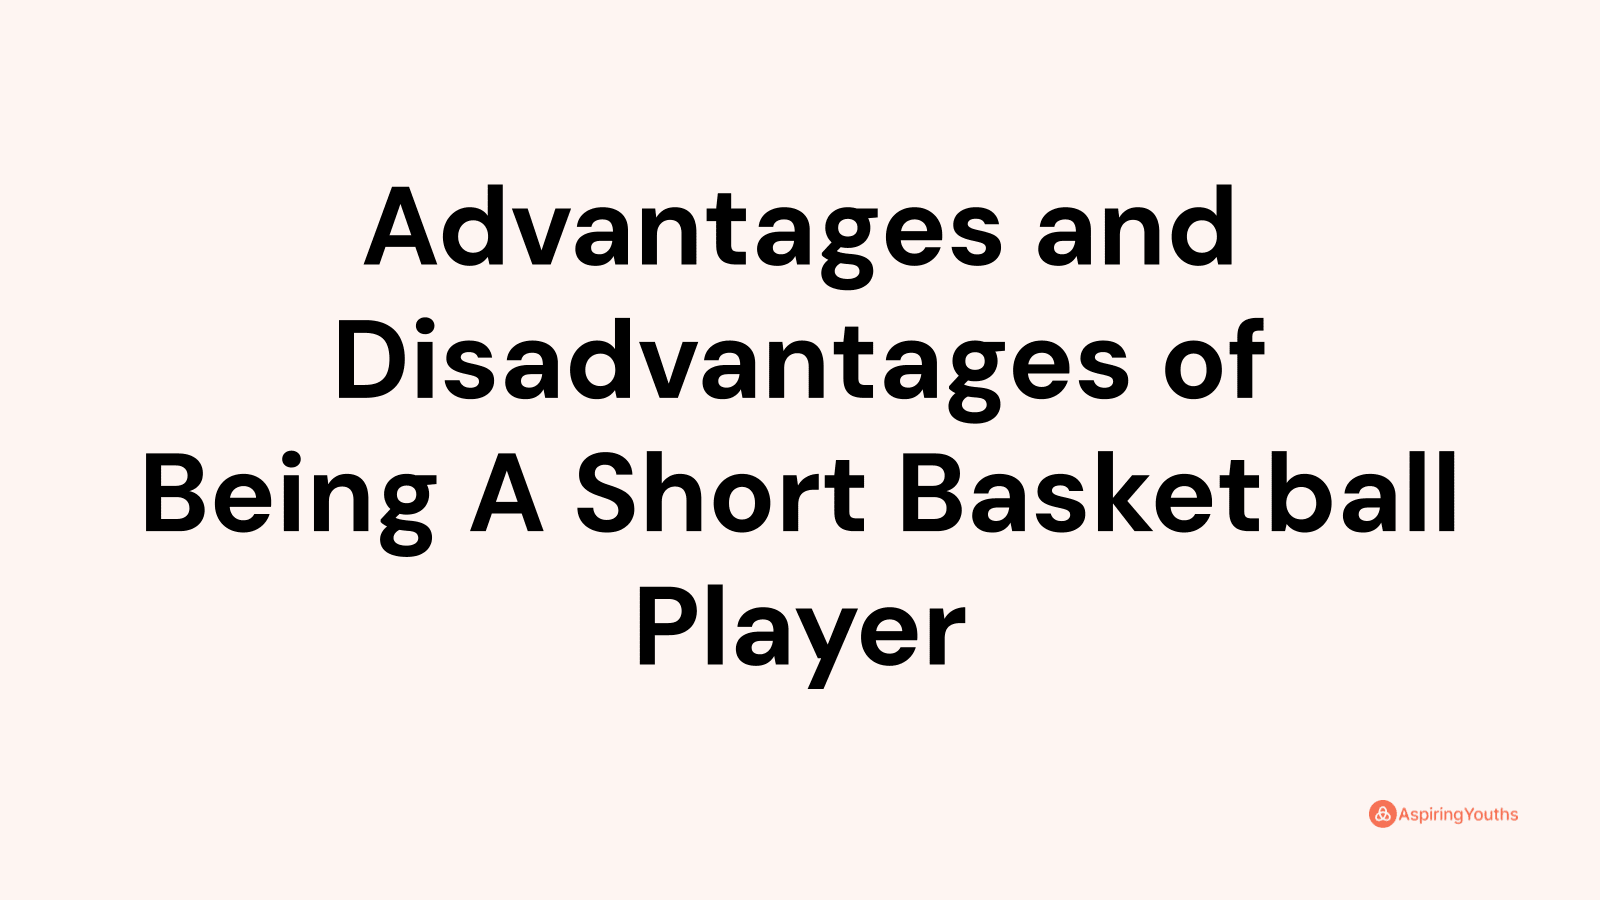 Advantages and disadvantages of Being A Short Basketball Player